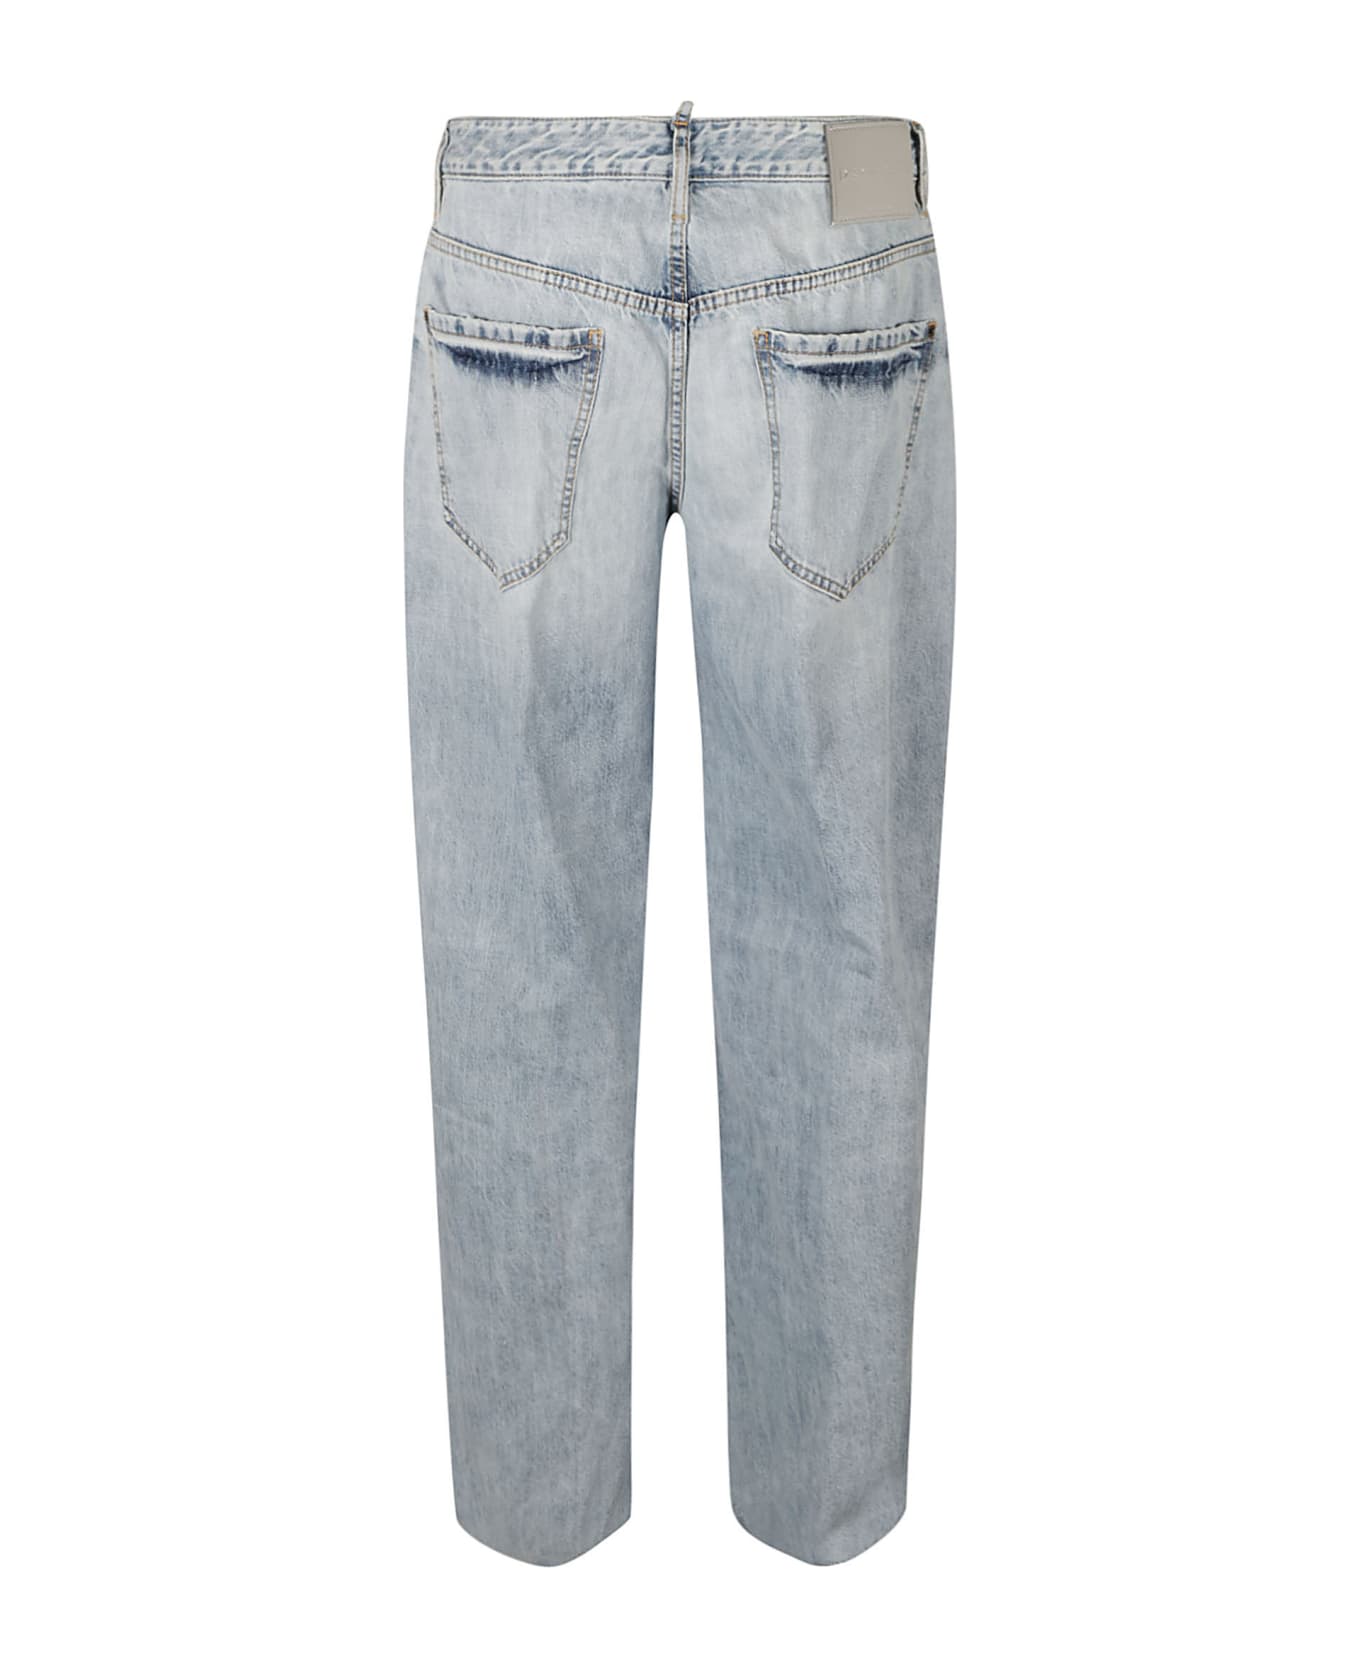 Dsquared2 Distressed Straight Jeans - BLUE デニム